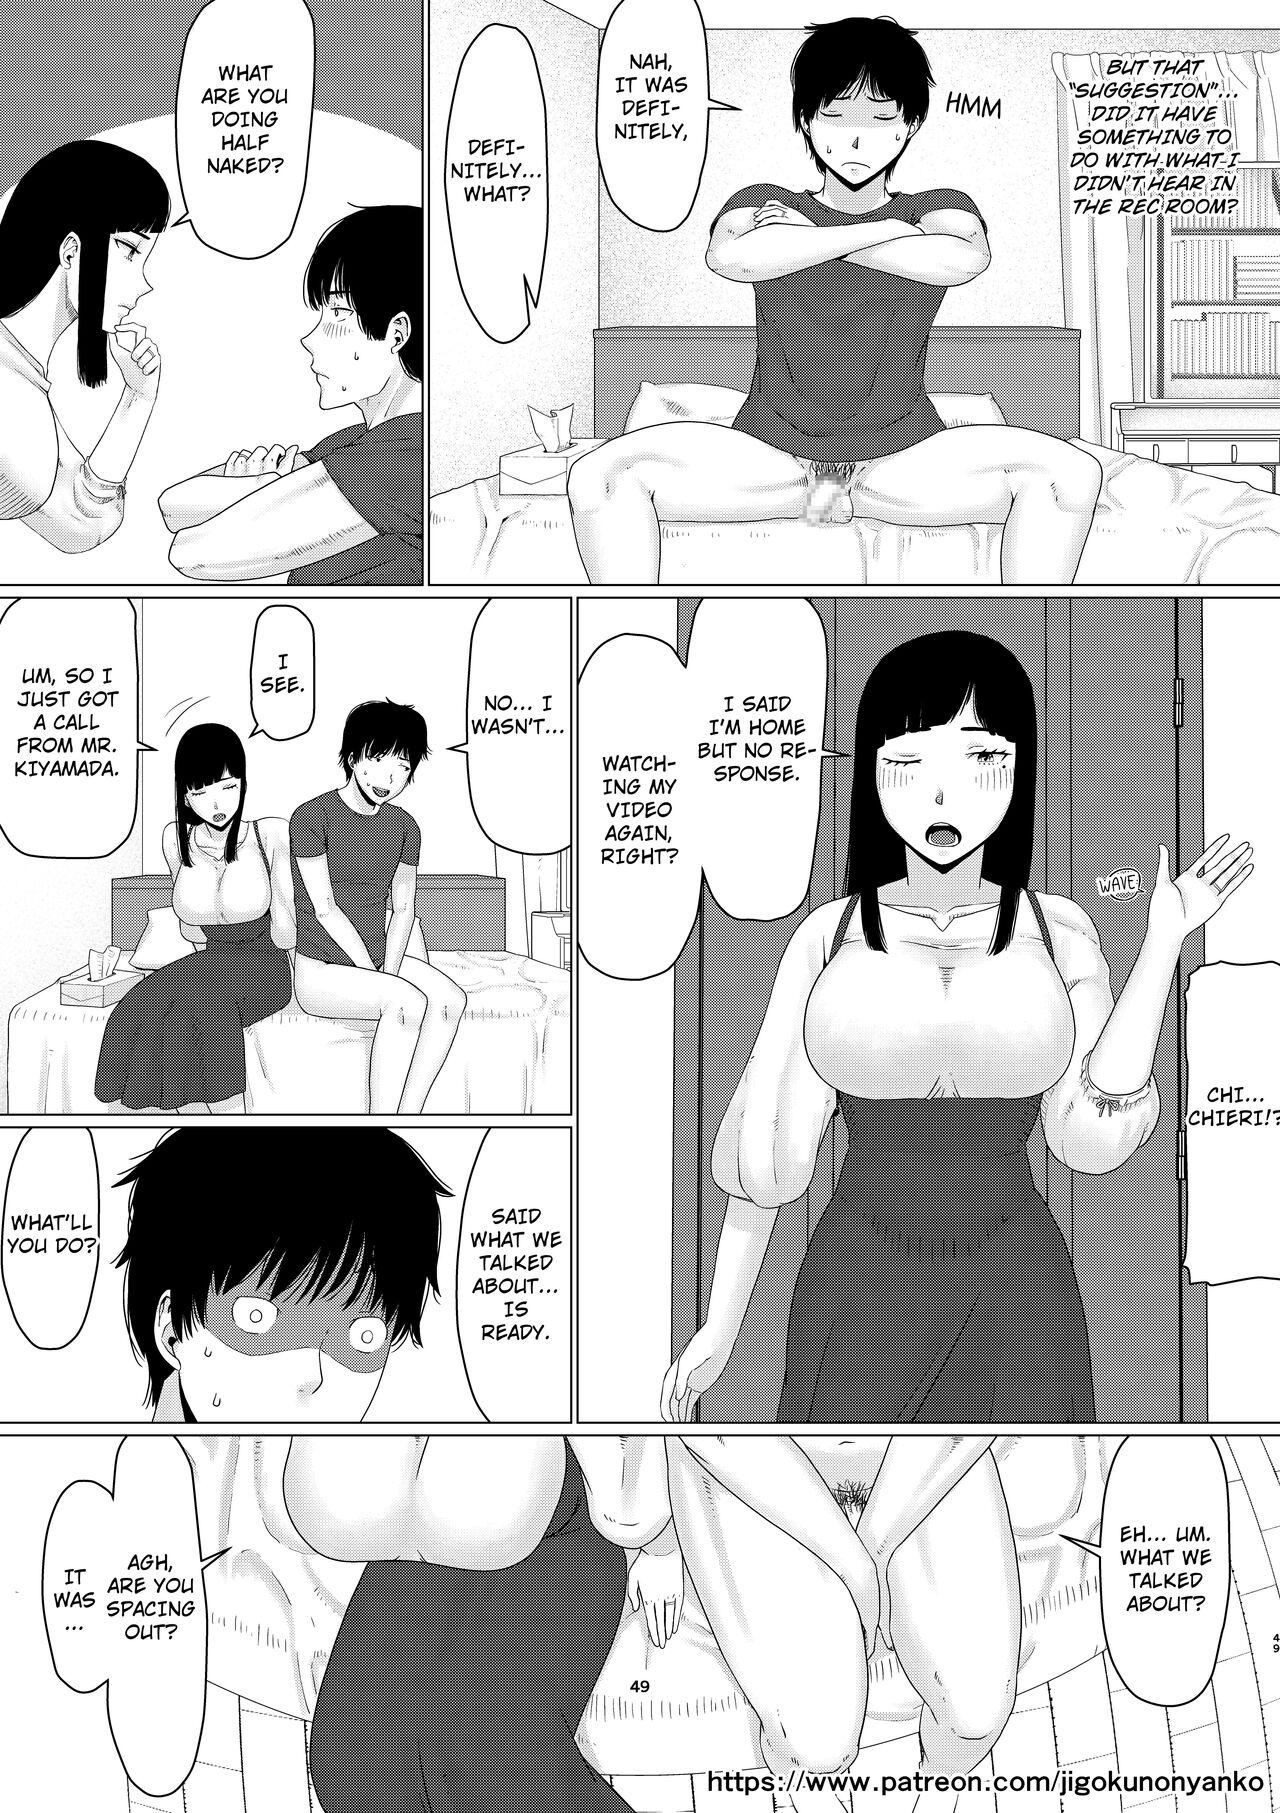 [Jigoku no Nyanko] Chieri-san Never Gives Up! 3 Part-1:Perverted toilet wife who fertilizes anyone's sperm with her husband's approval [Eng] 48